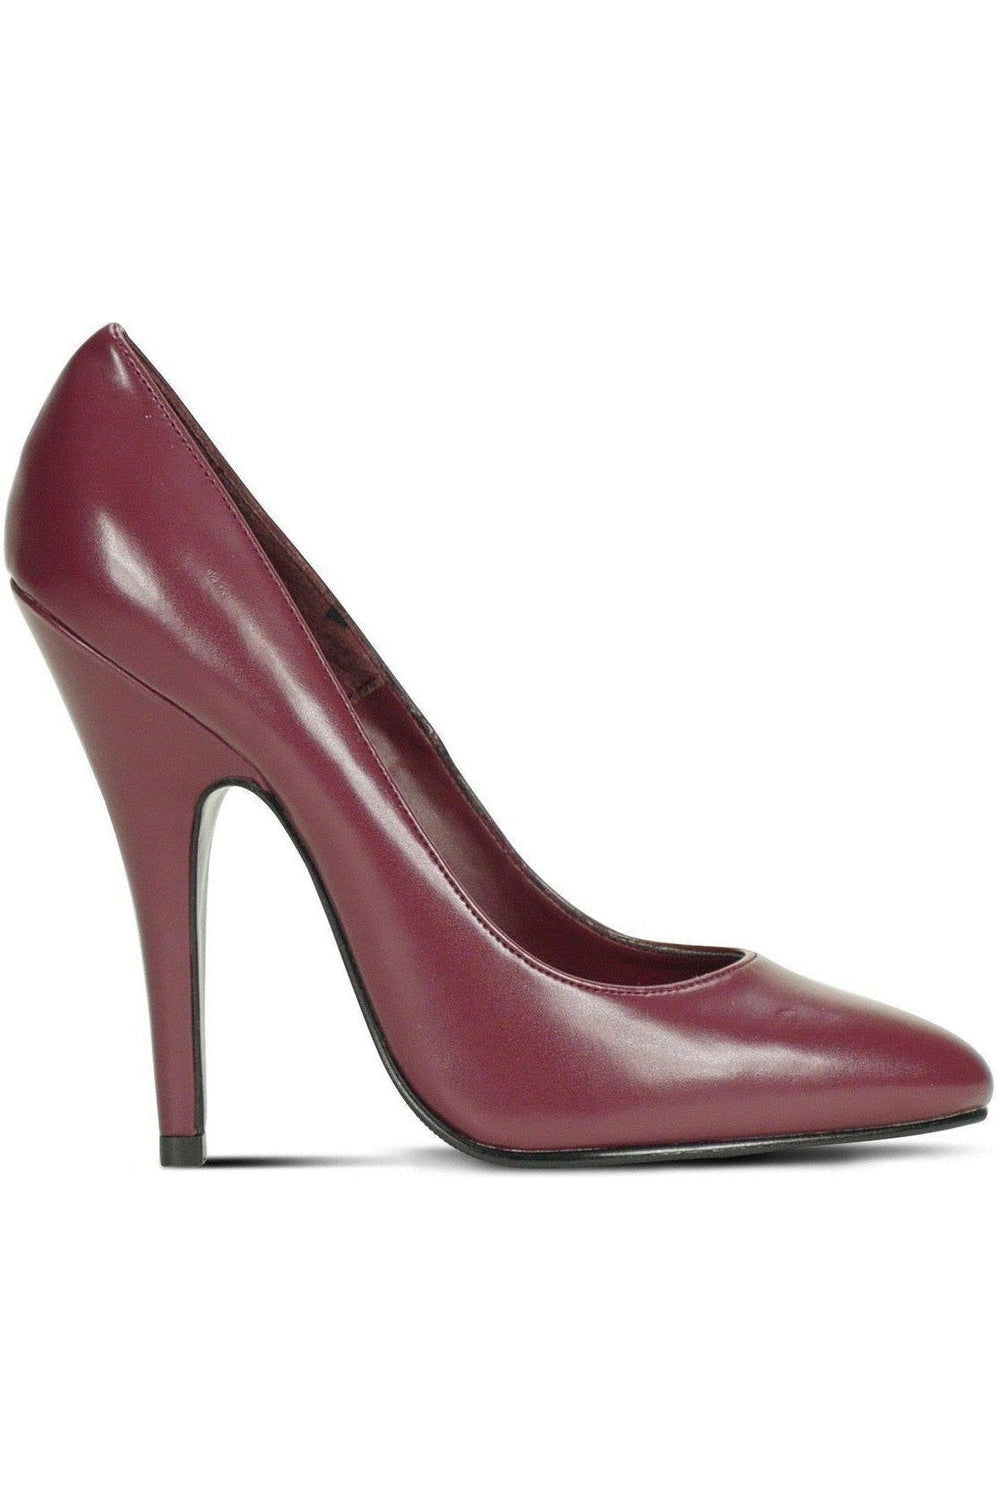 Sexy-4211 Vintage High Heel Pump | Wine Faux Leather-Sexyshoes Brand-Pumps-SEXYSHOES.COM